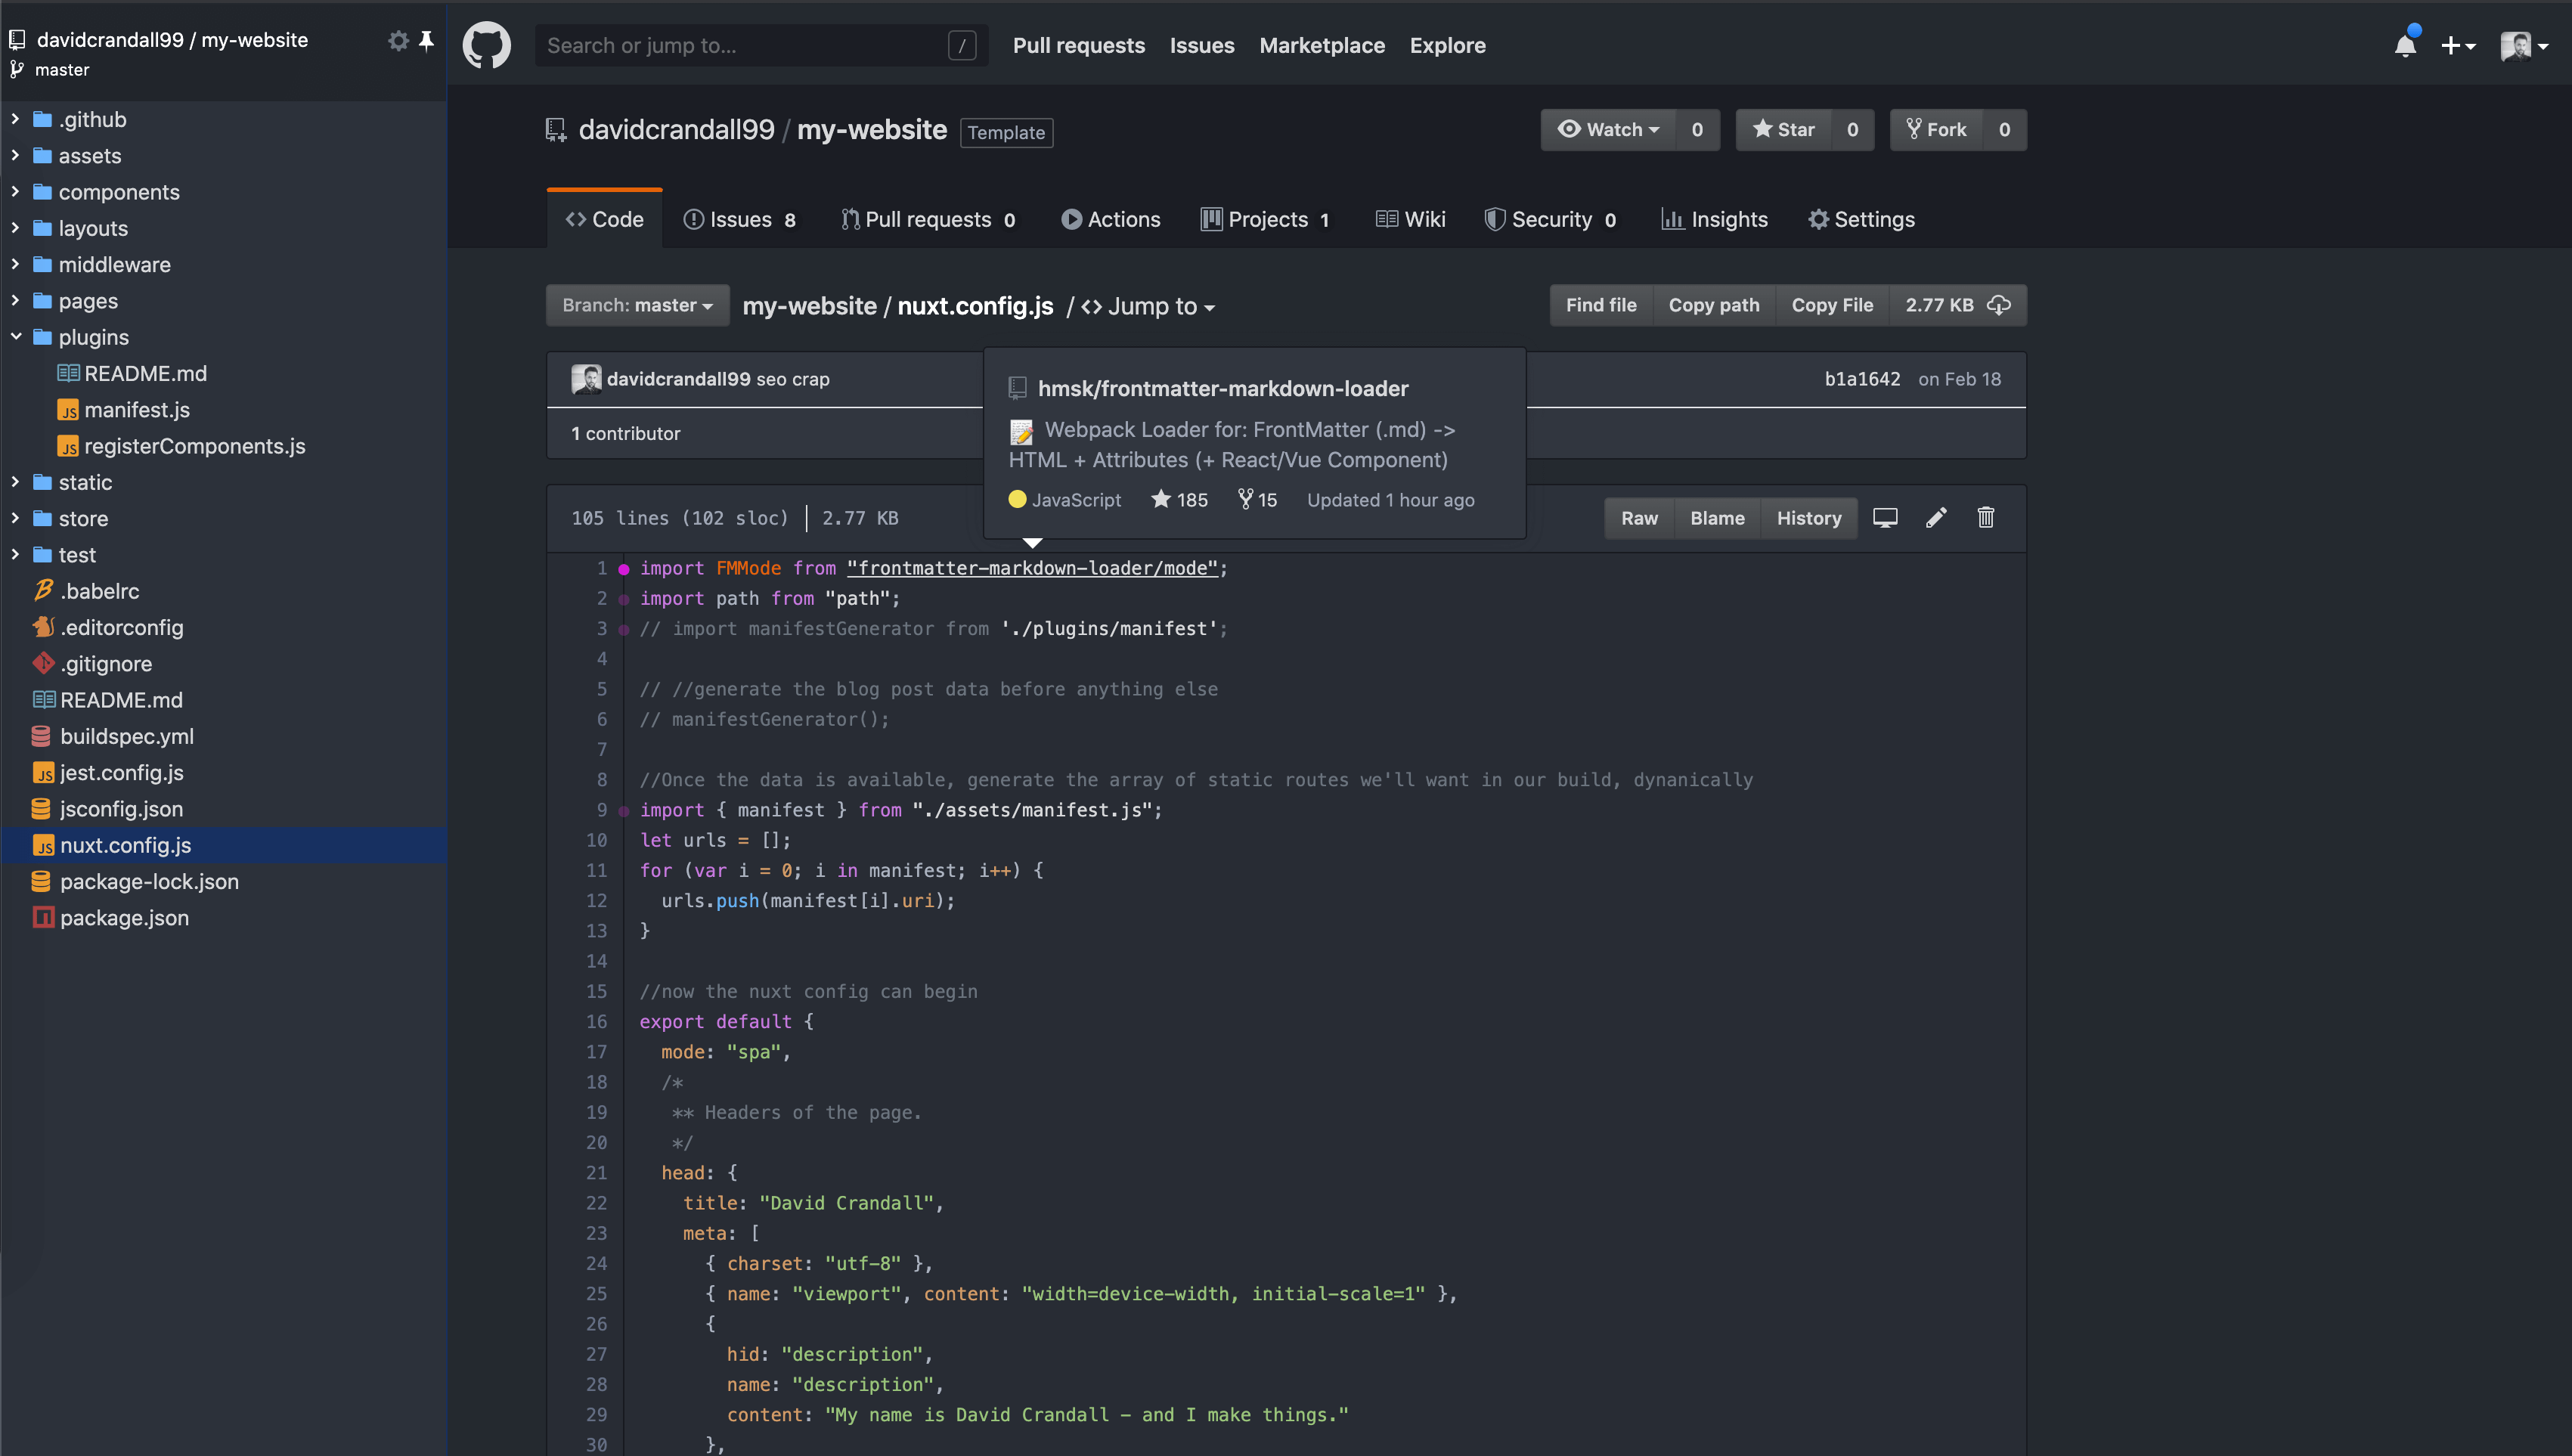 Github Dark Mode and a file browser?!